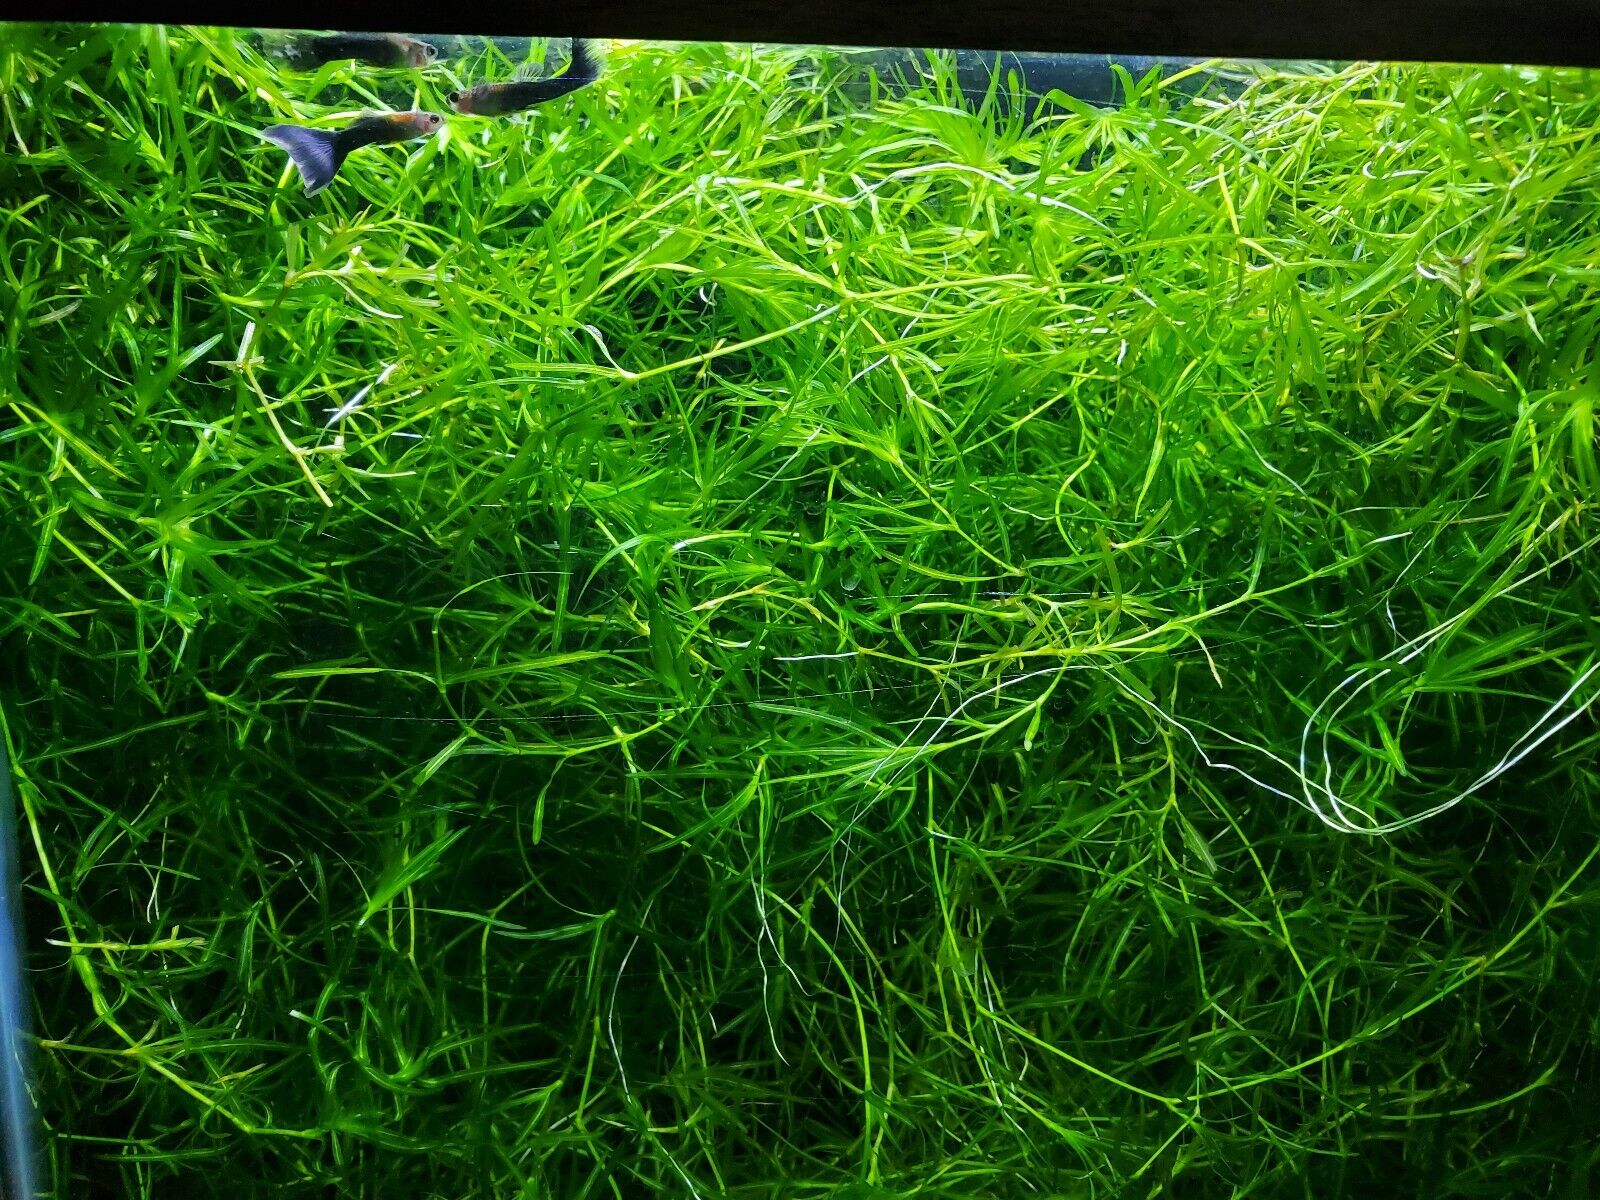  Guppy Grass -Najas guadalupensis Floating or planted aquatic plant 